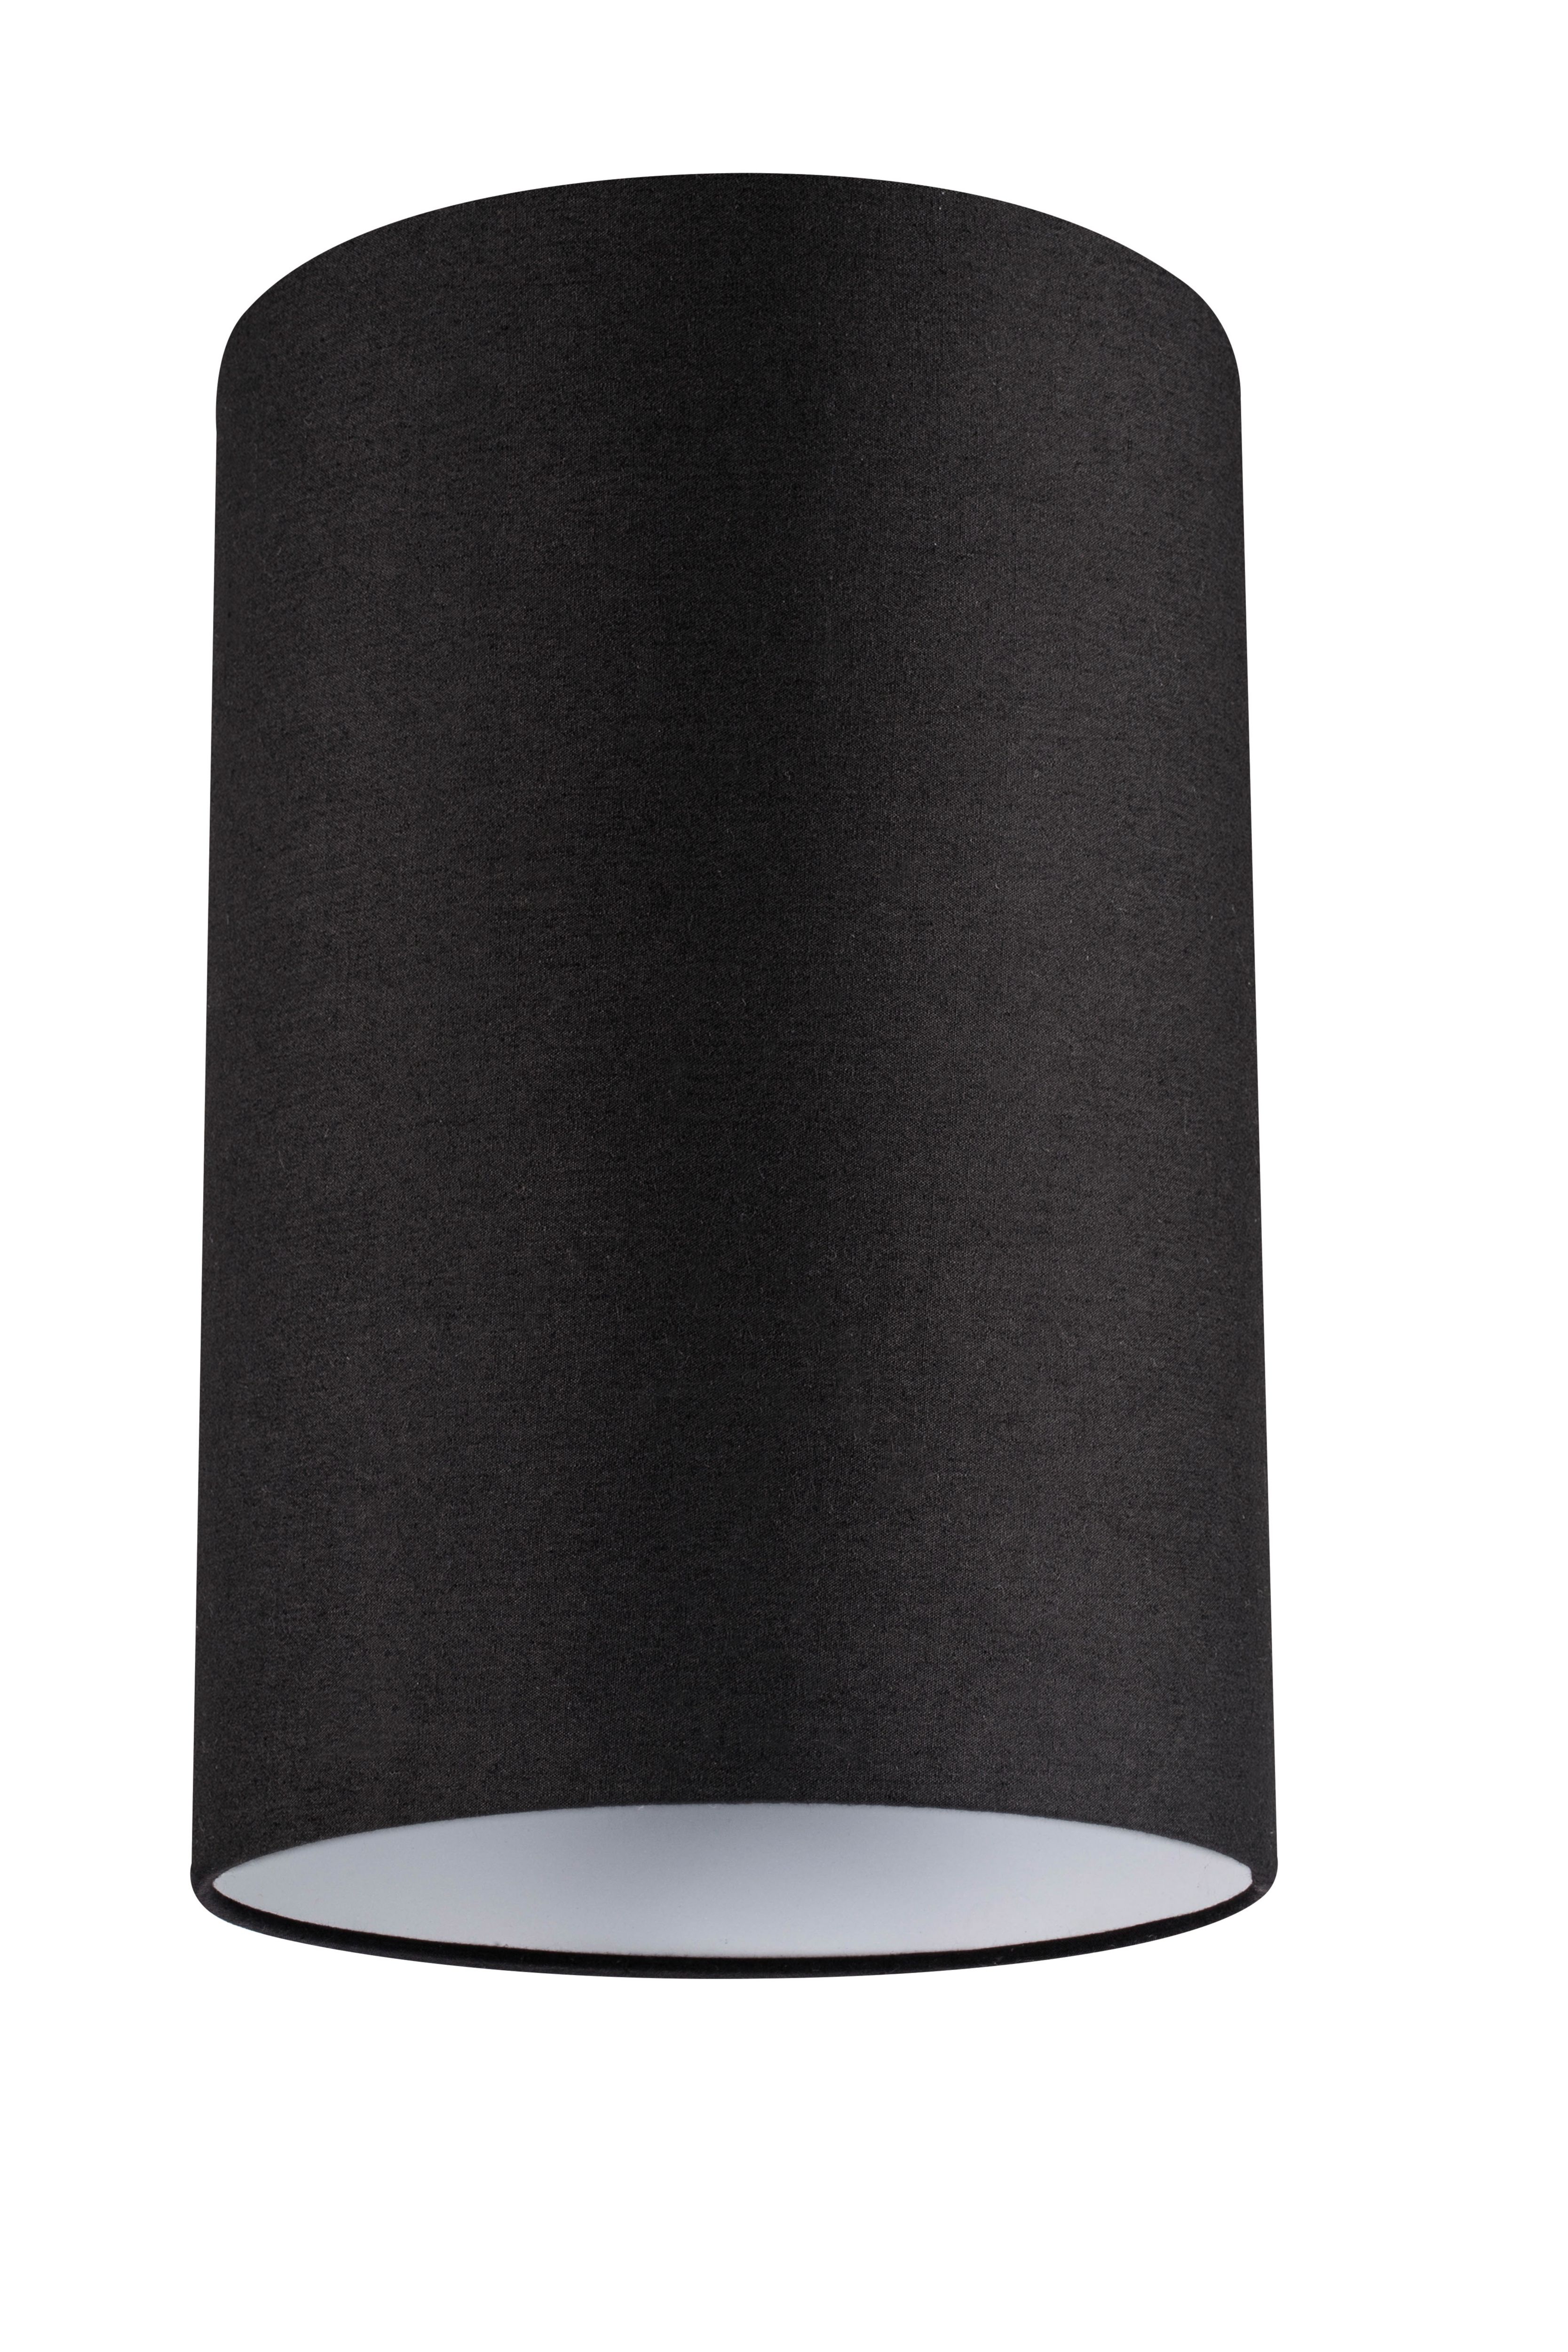 GoodHome Pibrock Charcoal Fabric dyed Light shade (D)20cm